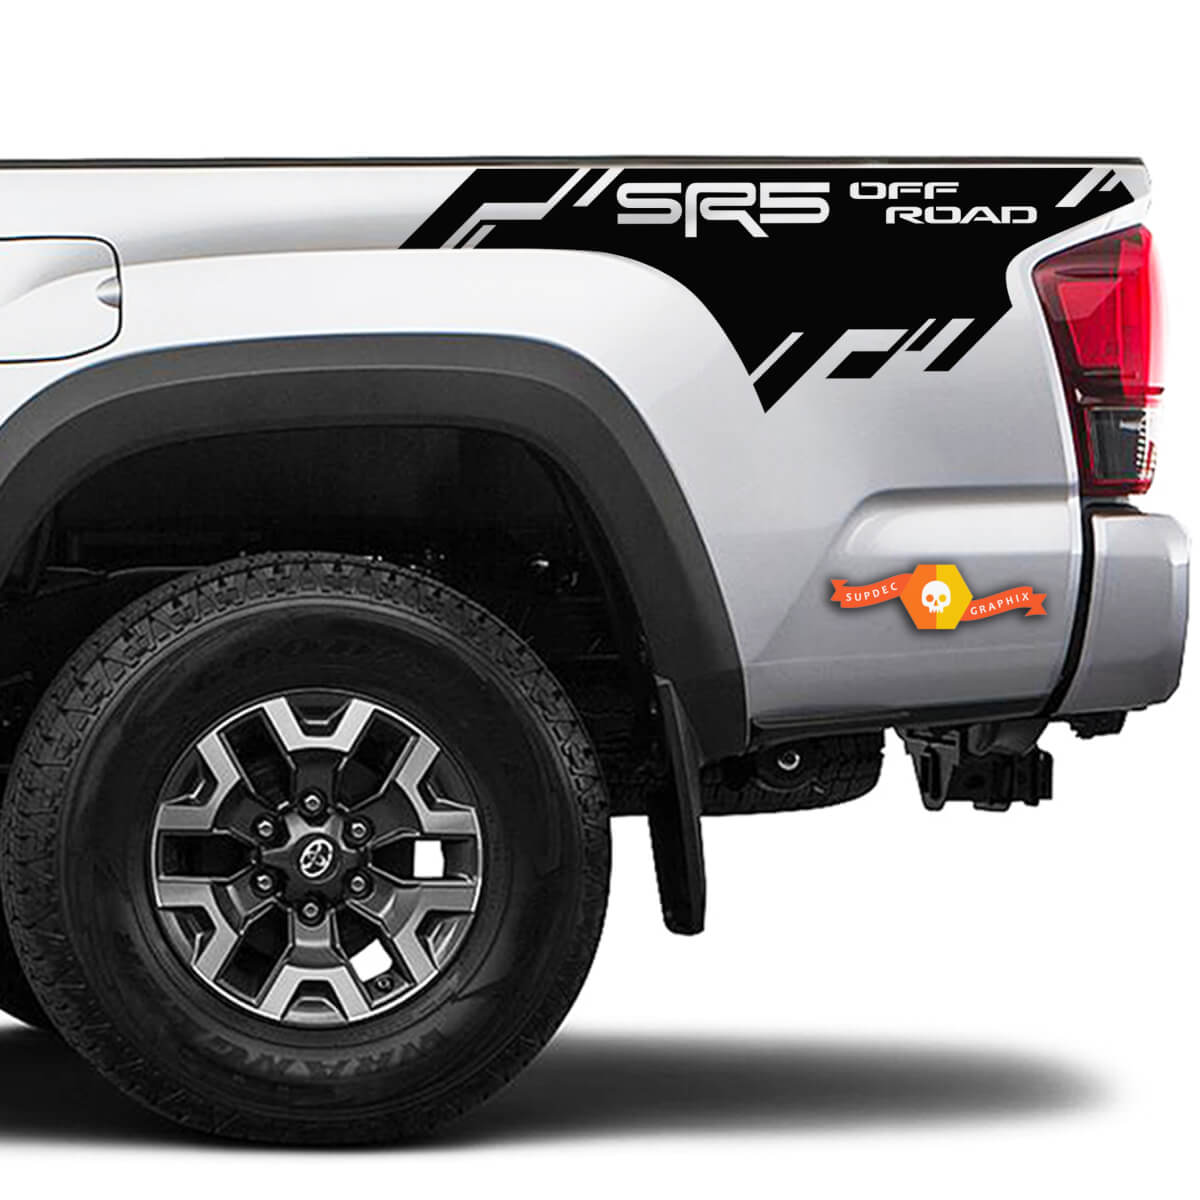 2 New Toyota Tacoma 2016-2022+ SR5 OF-ROAD Bed Side Bed Stripes Vinyl Stickers Decal for Toyota Tacoma